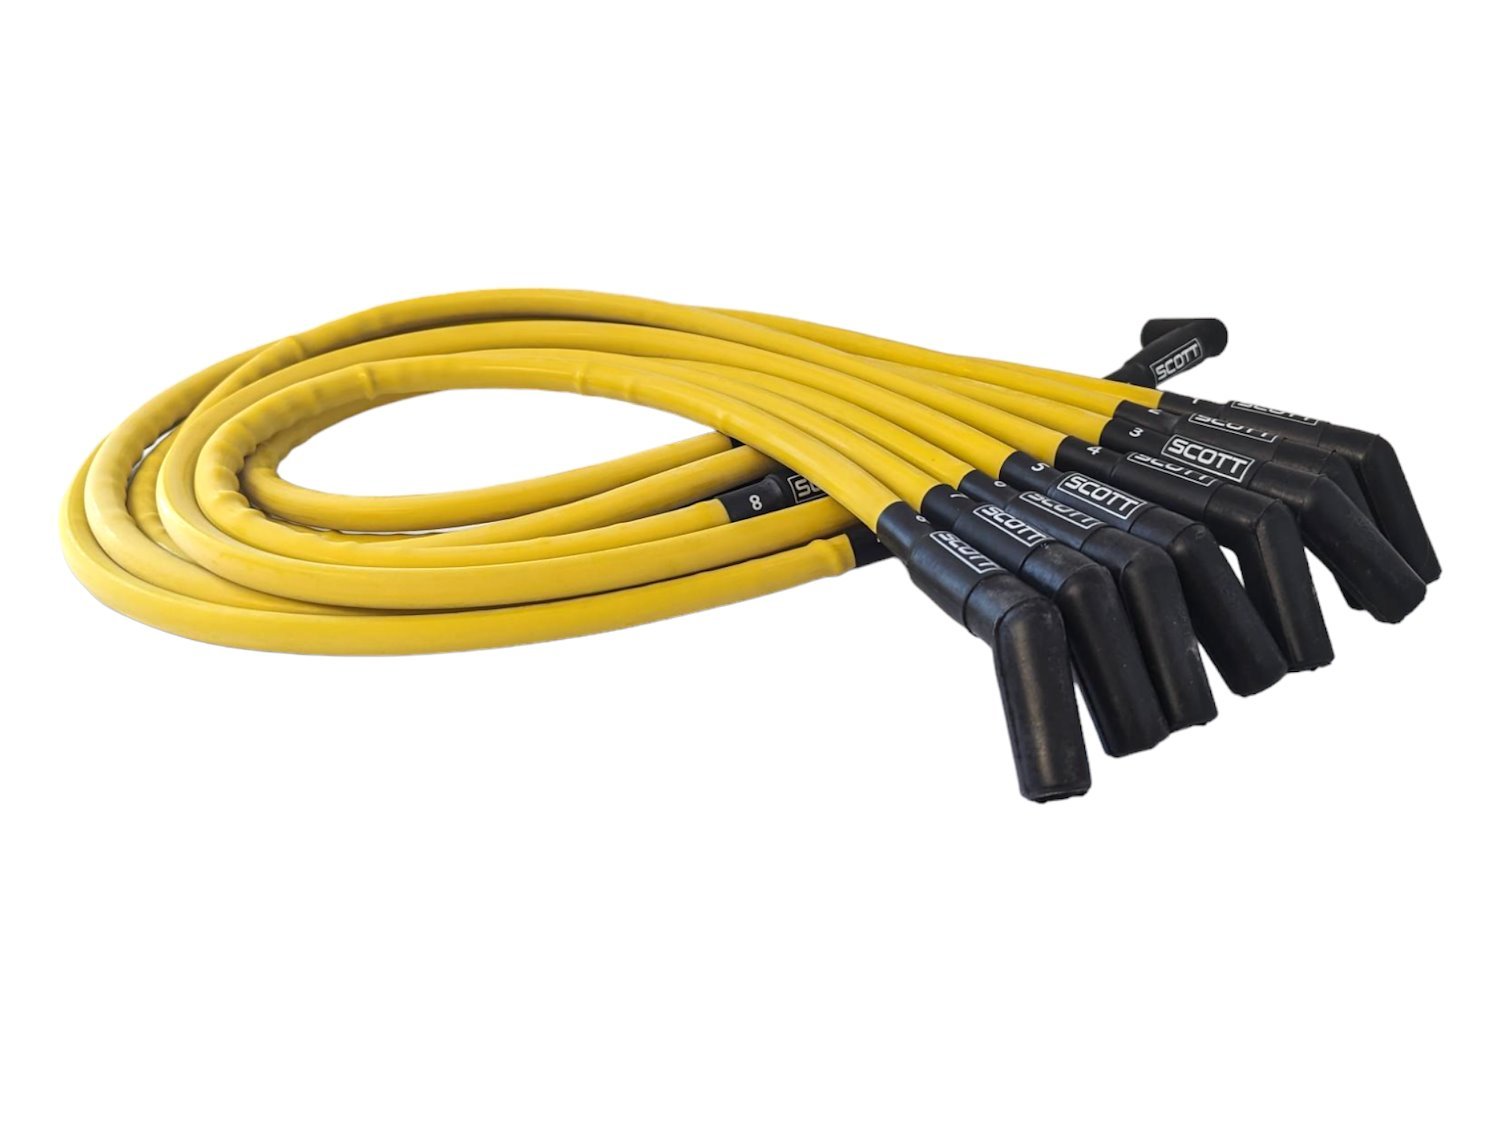 SPW300-CH-426-7 Super Mag Fiberglass-Oversleeved Spark Plug Wire Set for Small Block Ford, Over Valve Cover [Yellow]